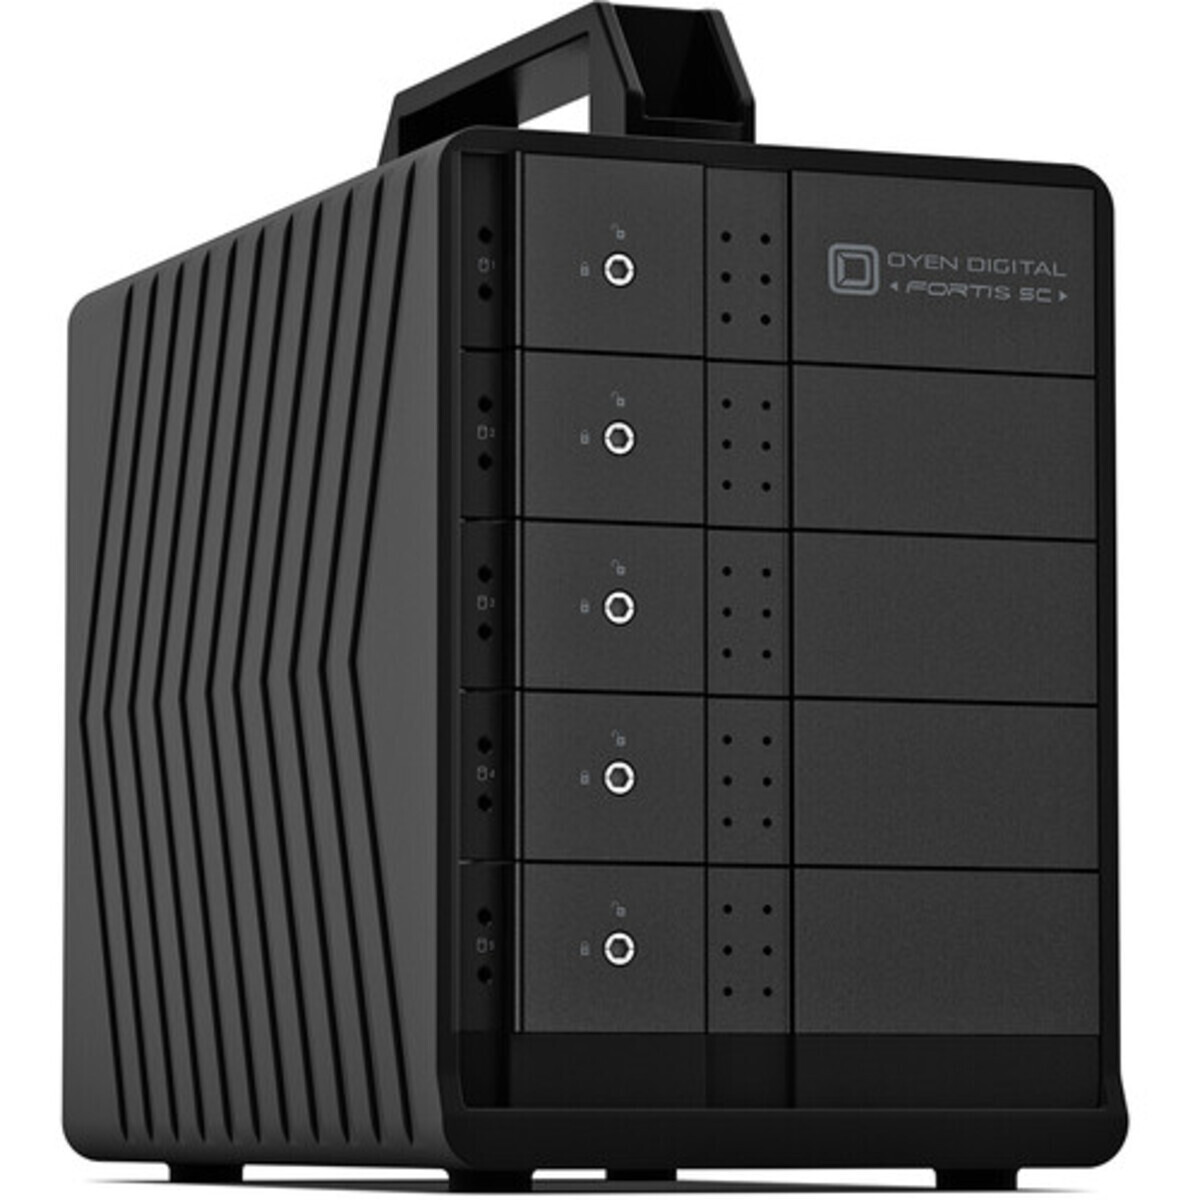 OYEN Fortis 5C 70tb 5-Bay Desktop Multimedia / Power User / Business DAS - Direct Attached Storage Device 5x14tb Seagate IronWolf Pro ST14000NT001 3.5 7200rpm SATA 6Gb/s HDD NAS Class Drives Installed - Burn-In Tested Fortis 5C